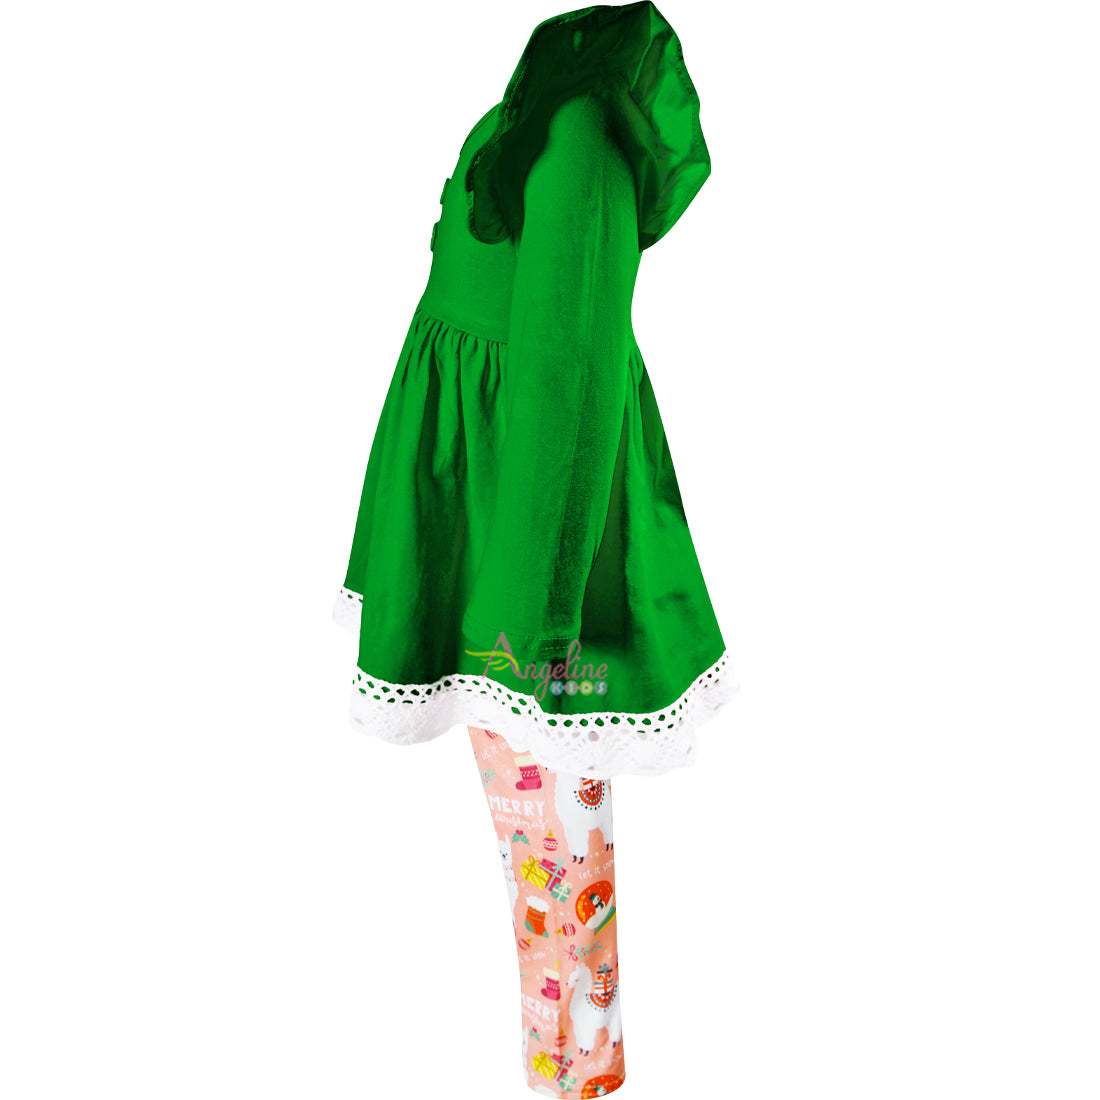 Baby Girls Christma Llama Outfit With Scarf - 3-pcs Top Leggings Scarf Sets - Angeline Kids